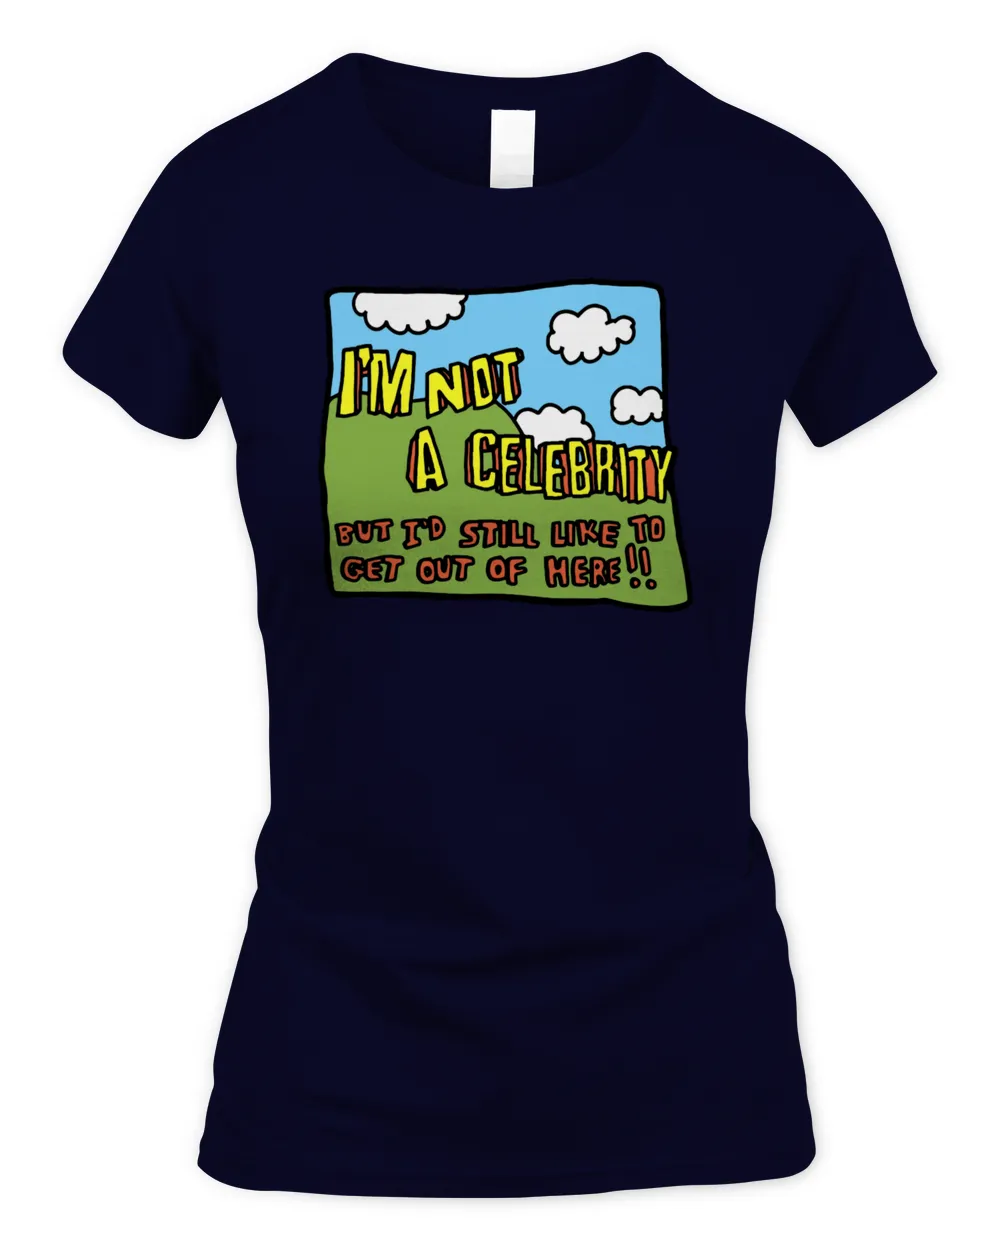 I'm Not A Celebrity But I'd Still Like To Get Out Of Here T Shirt Women's Standard T-Shirt navy 